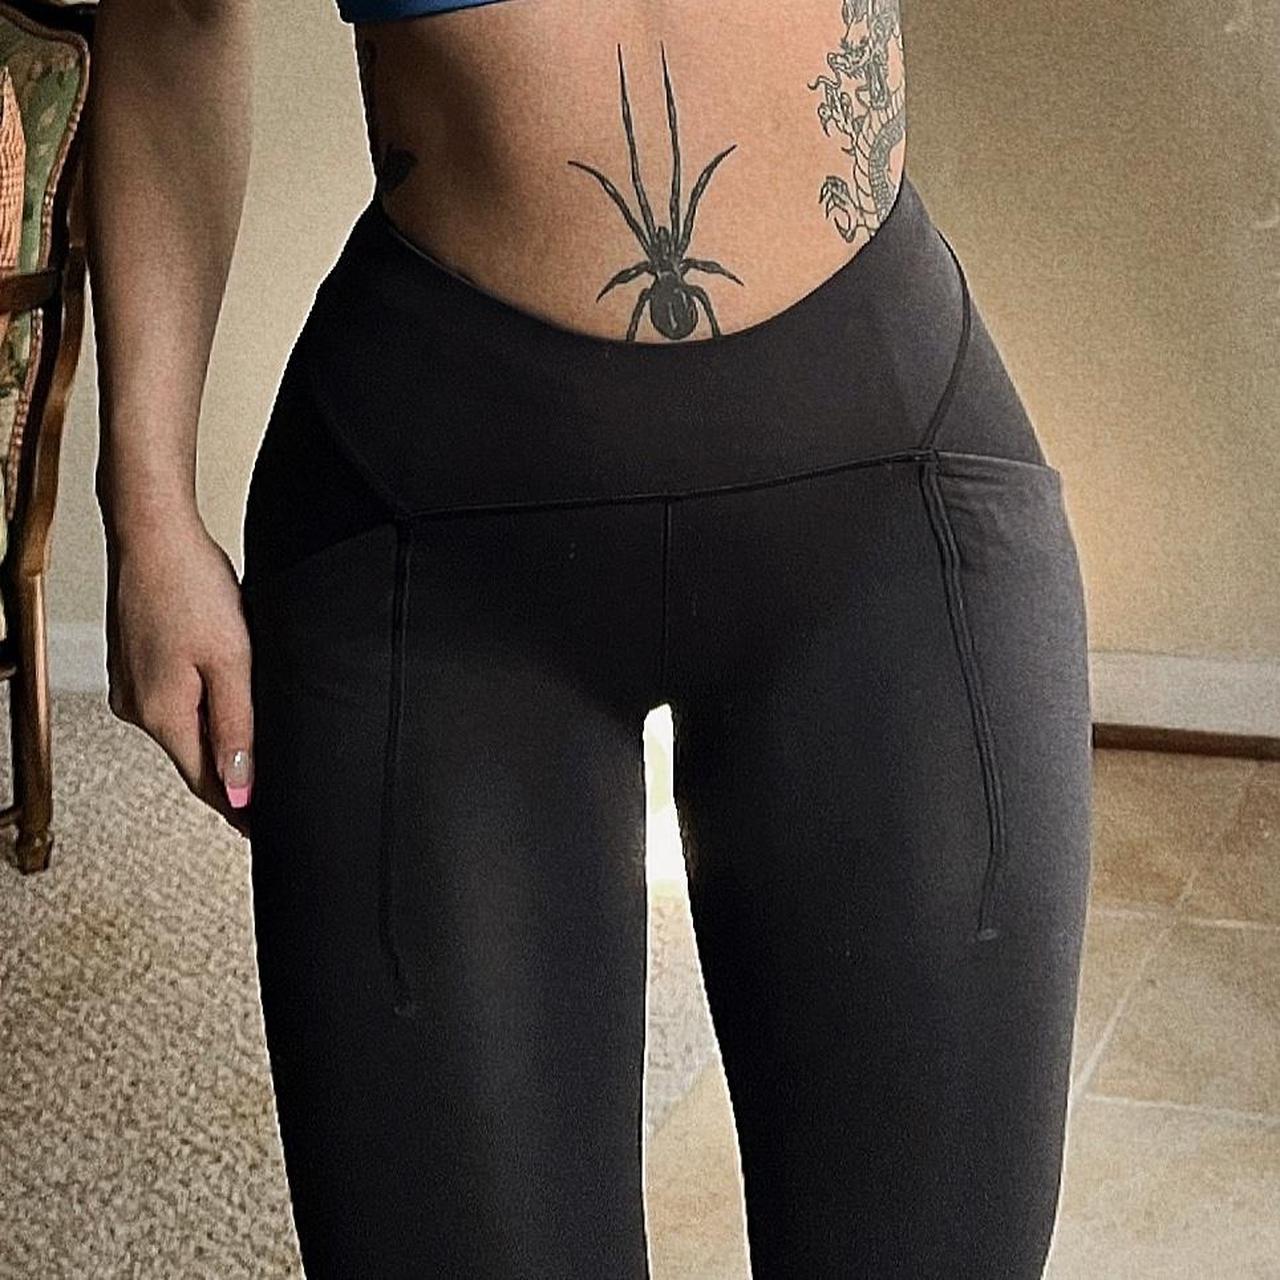 Lululemon leggings. Selling bc they’re too small on